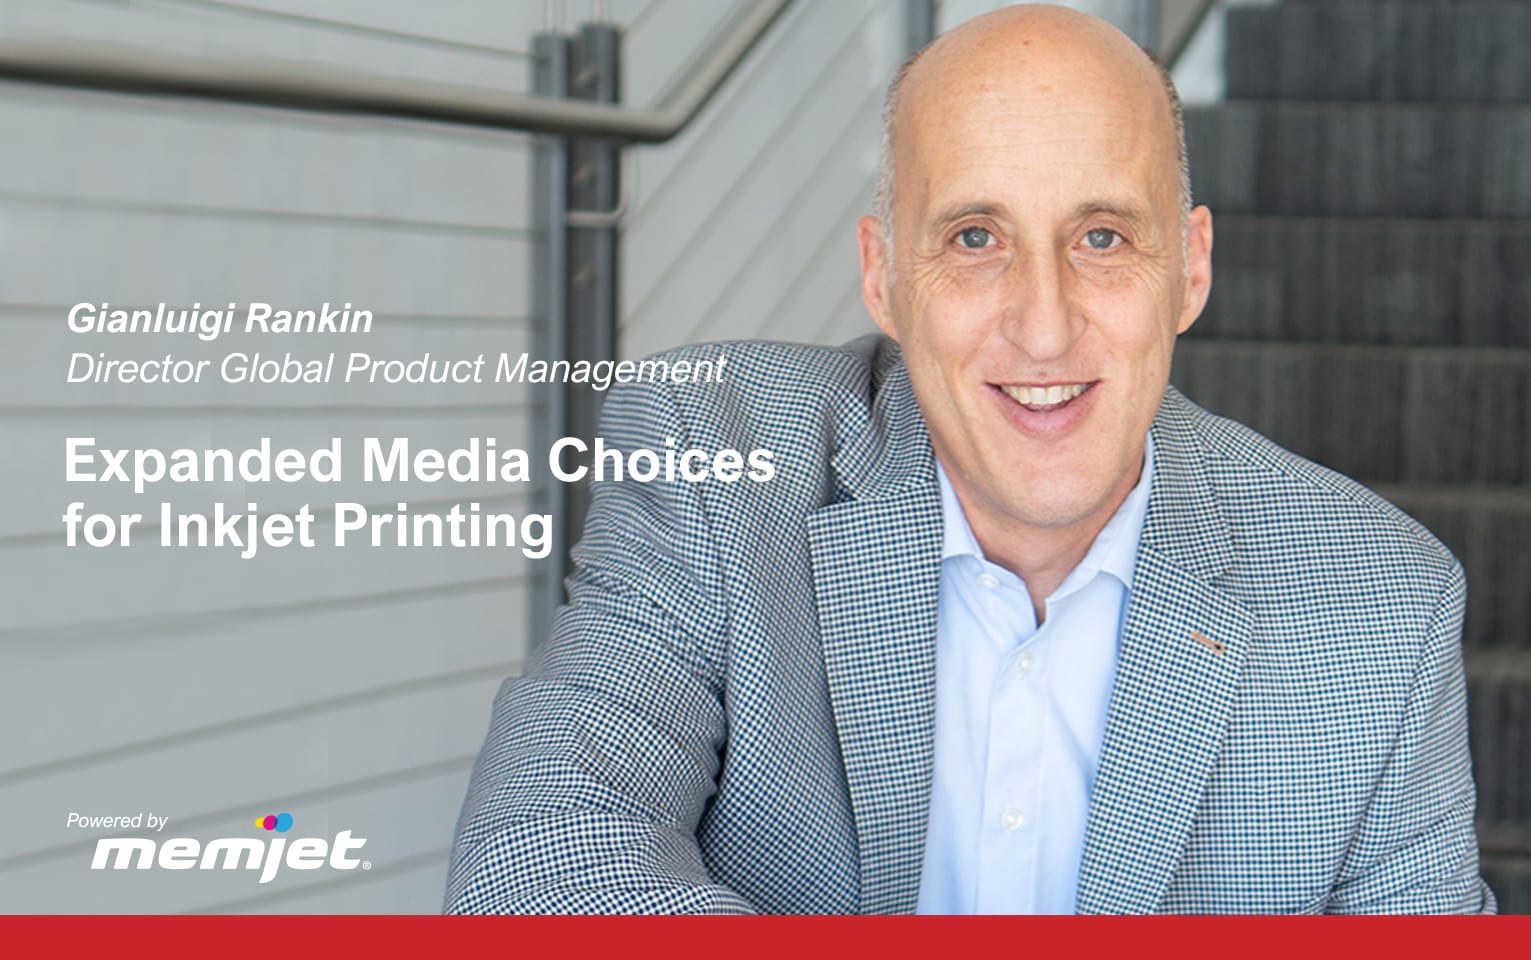 Expanded Media Choices for Inkjet Printing